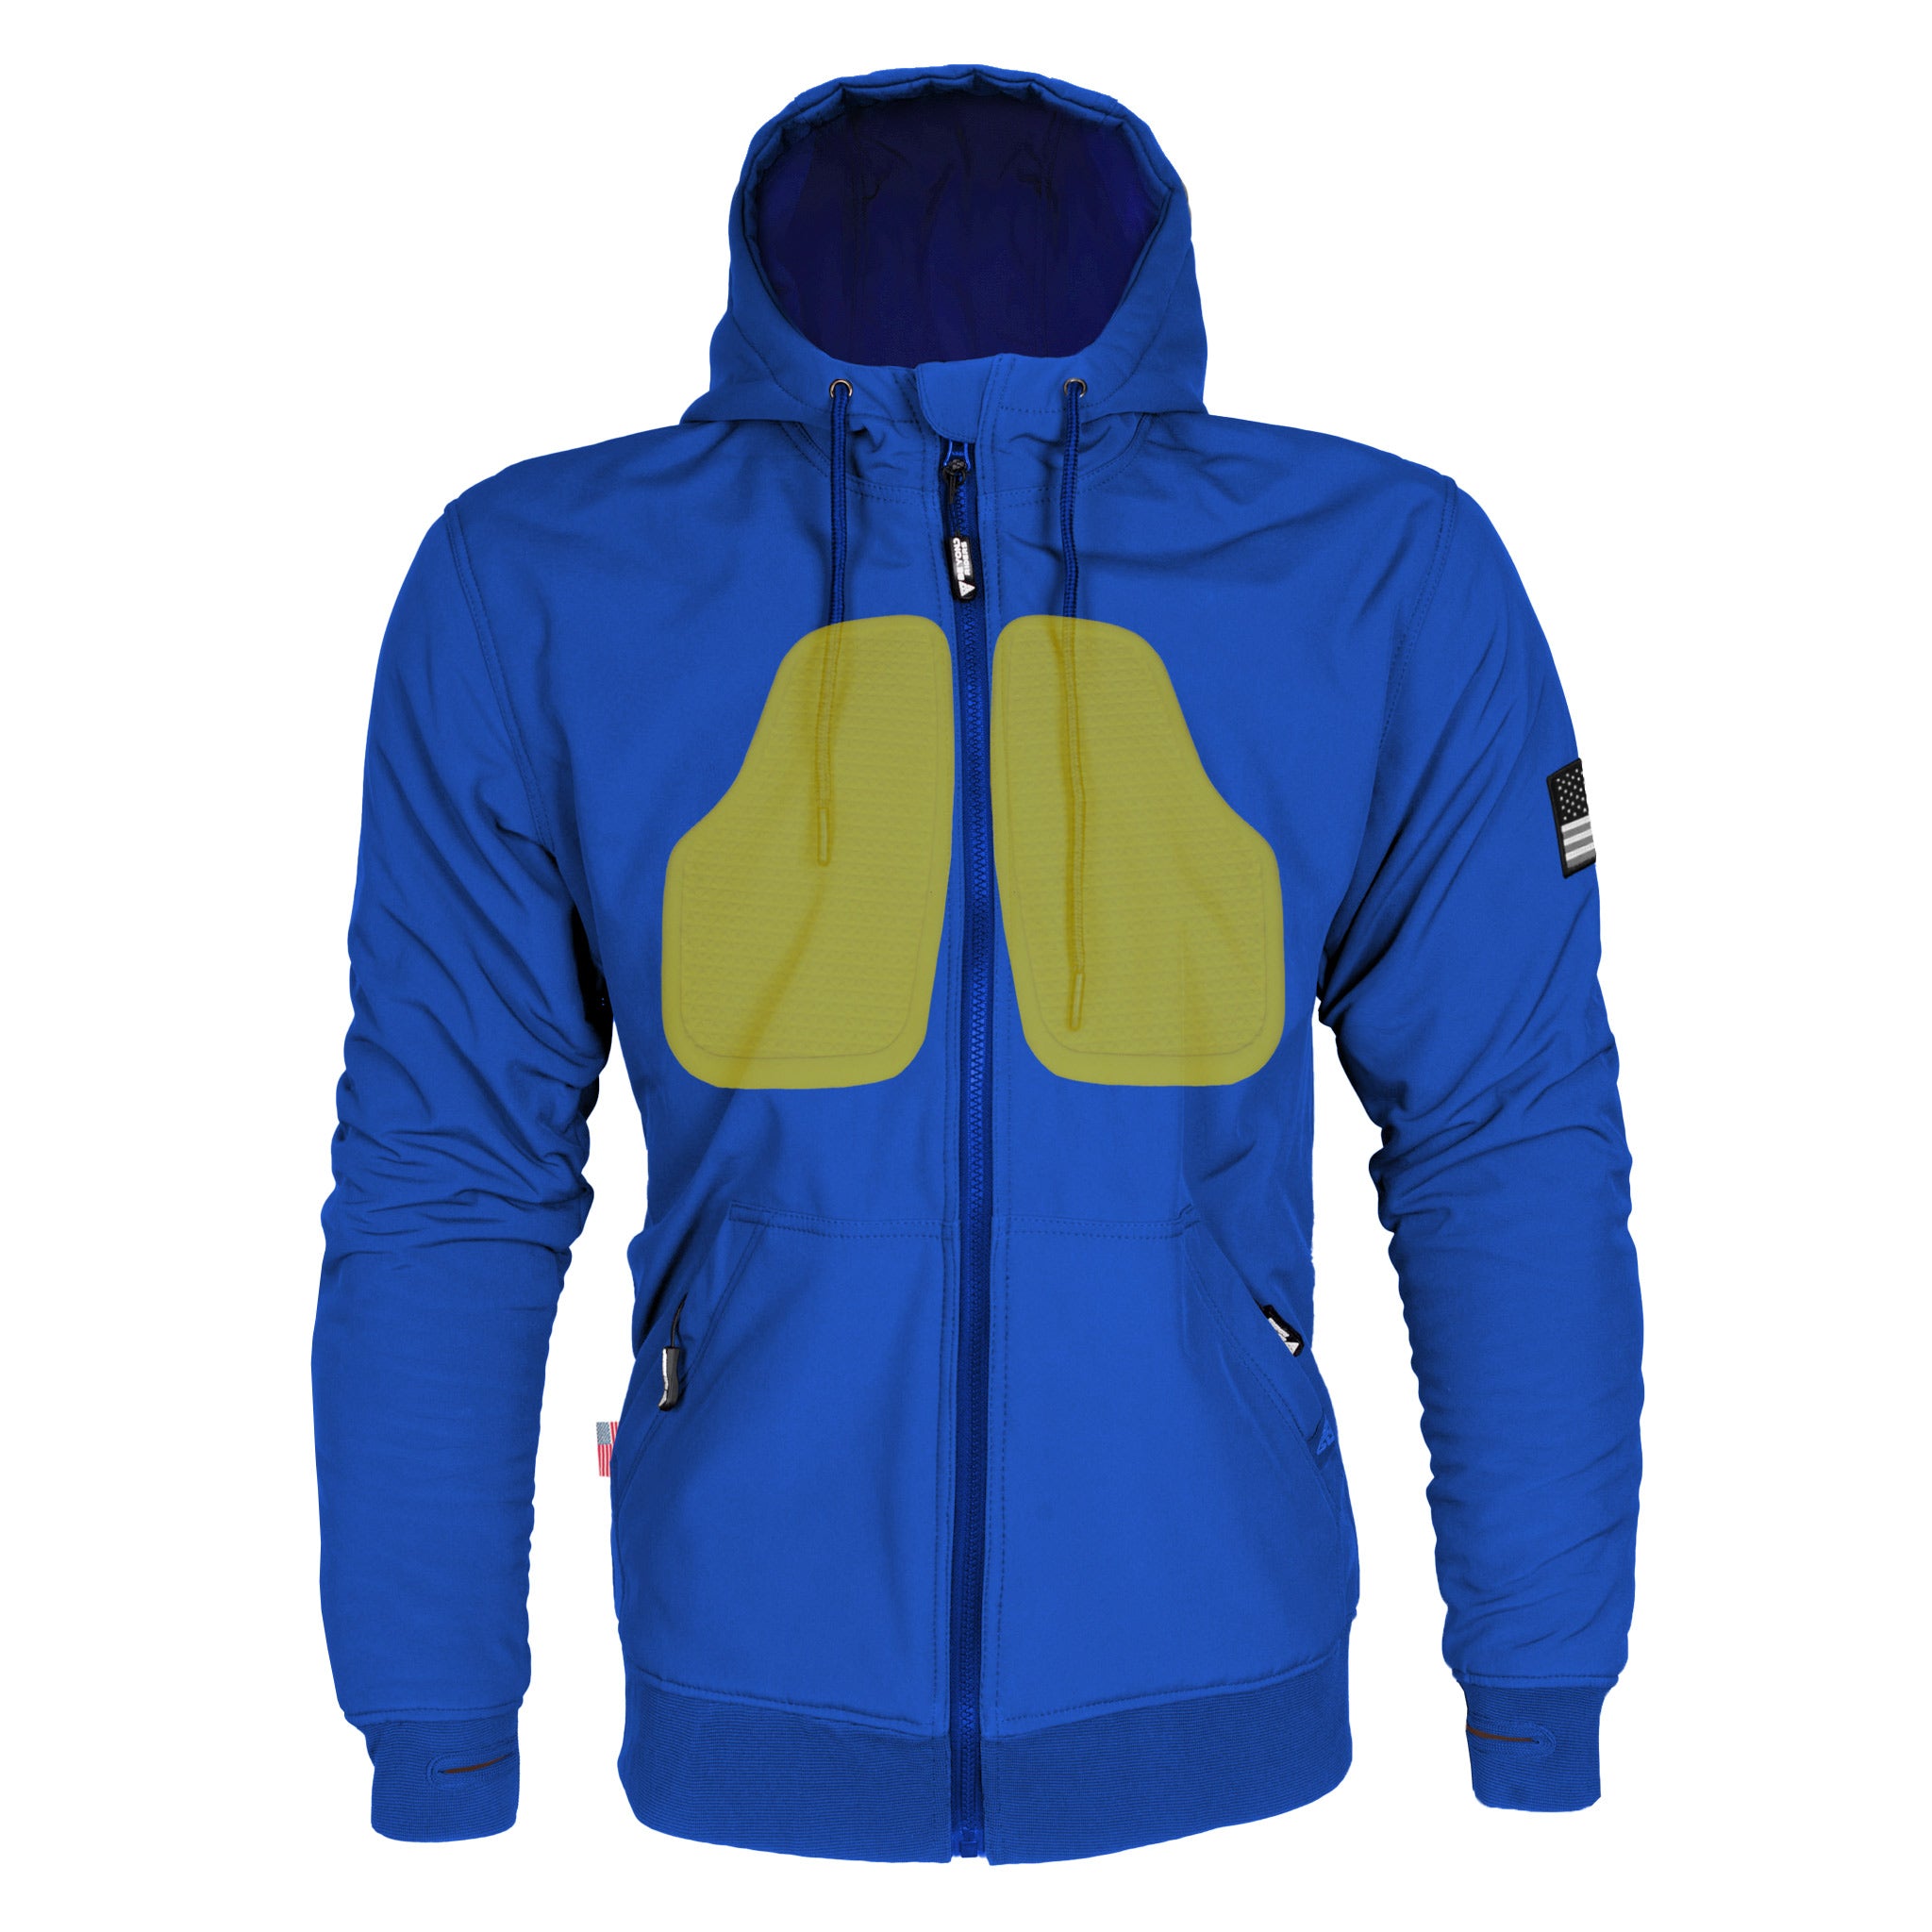 Protective SoftShell Unisex Hoodie - Royal Blue Matte with Pads